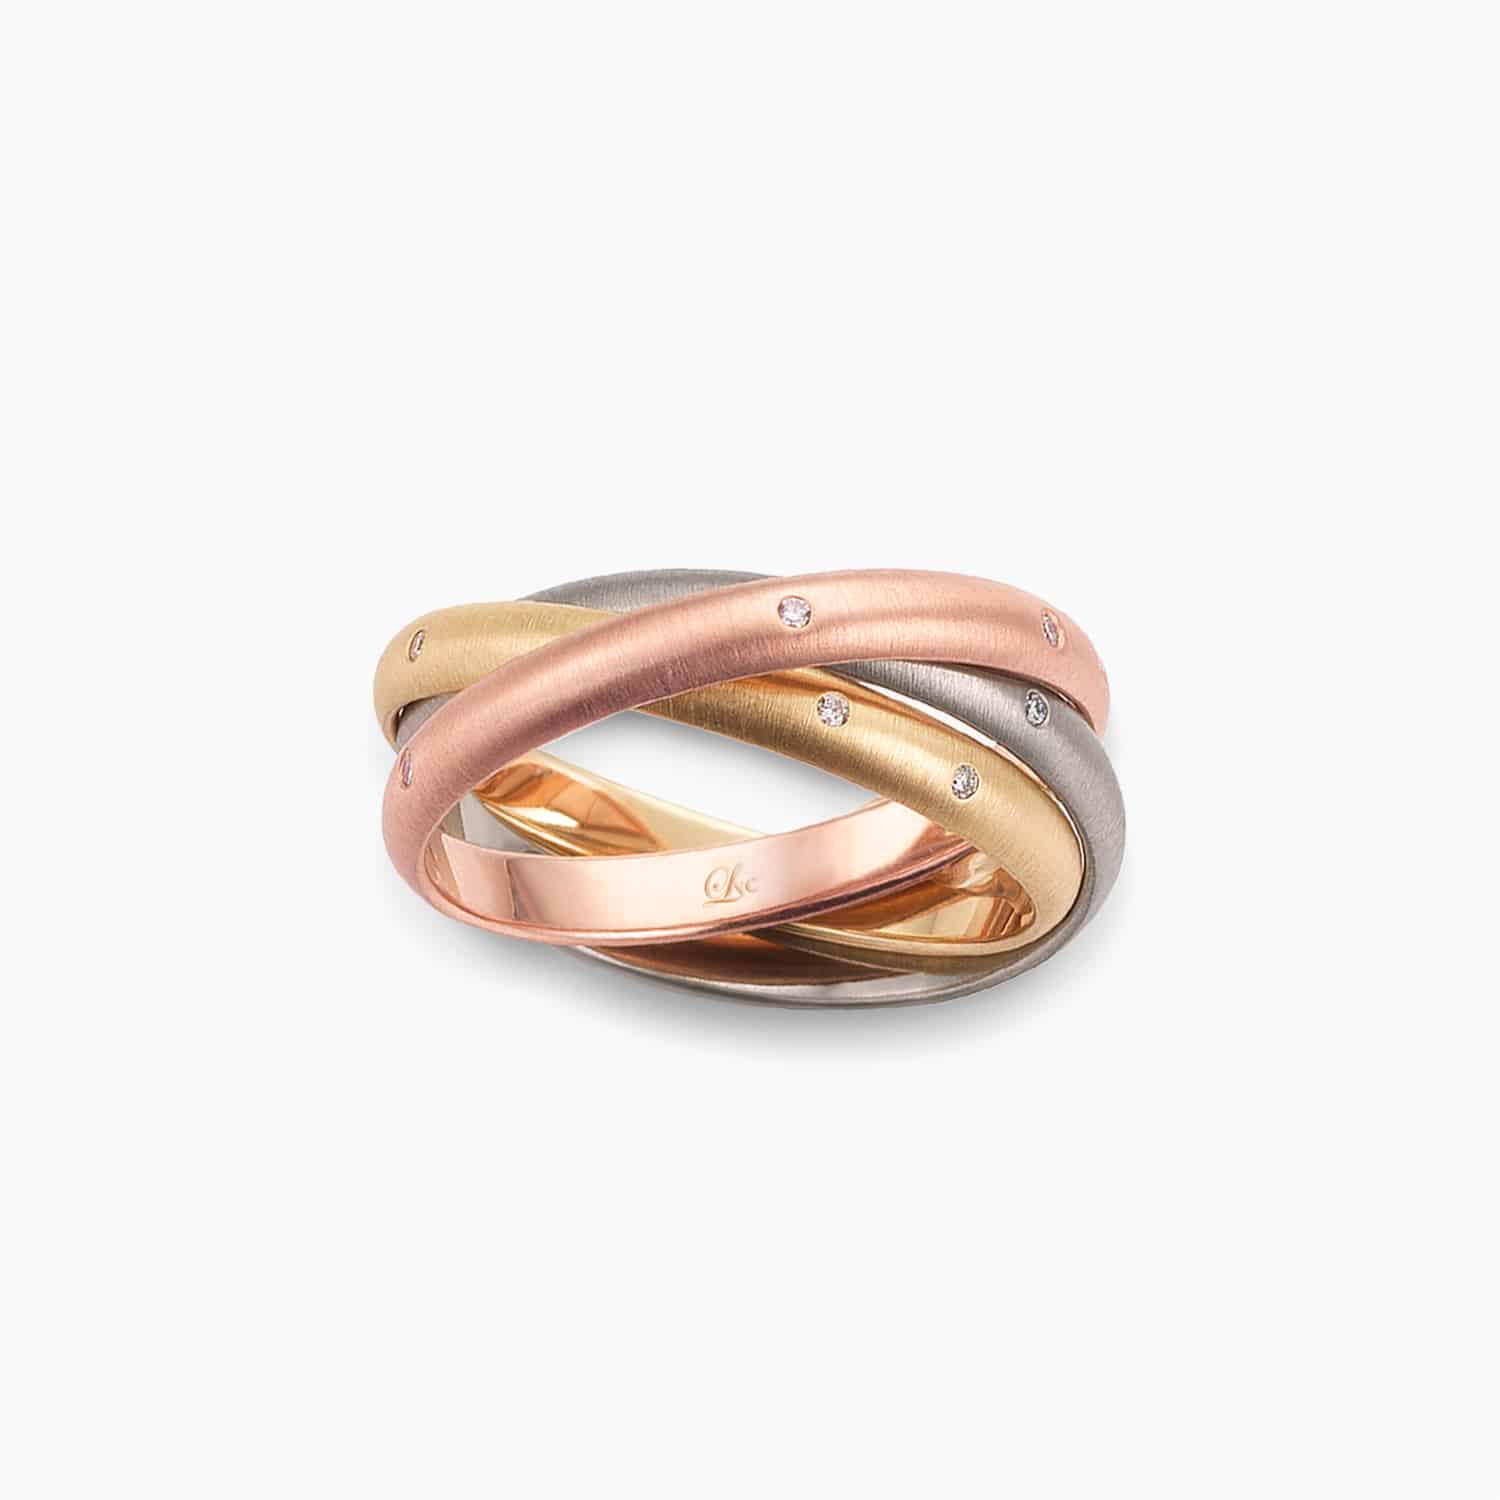 LVC SOLEIL TRINITY WEDDING BAND IN YELLOW WHITE AND ROSE GOLD WITH SATIN FINISH a wedding band for women with 7 diamonds 钻石 戒指 cincin diamond